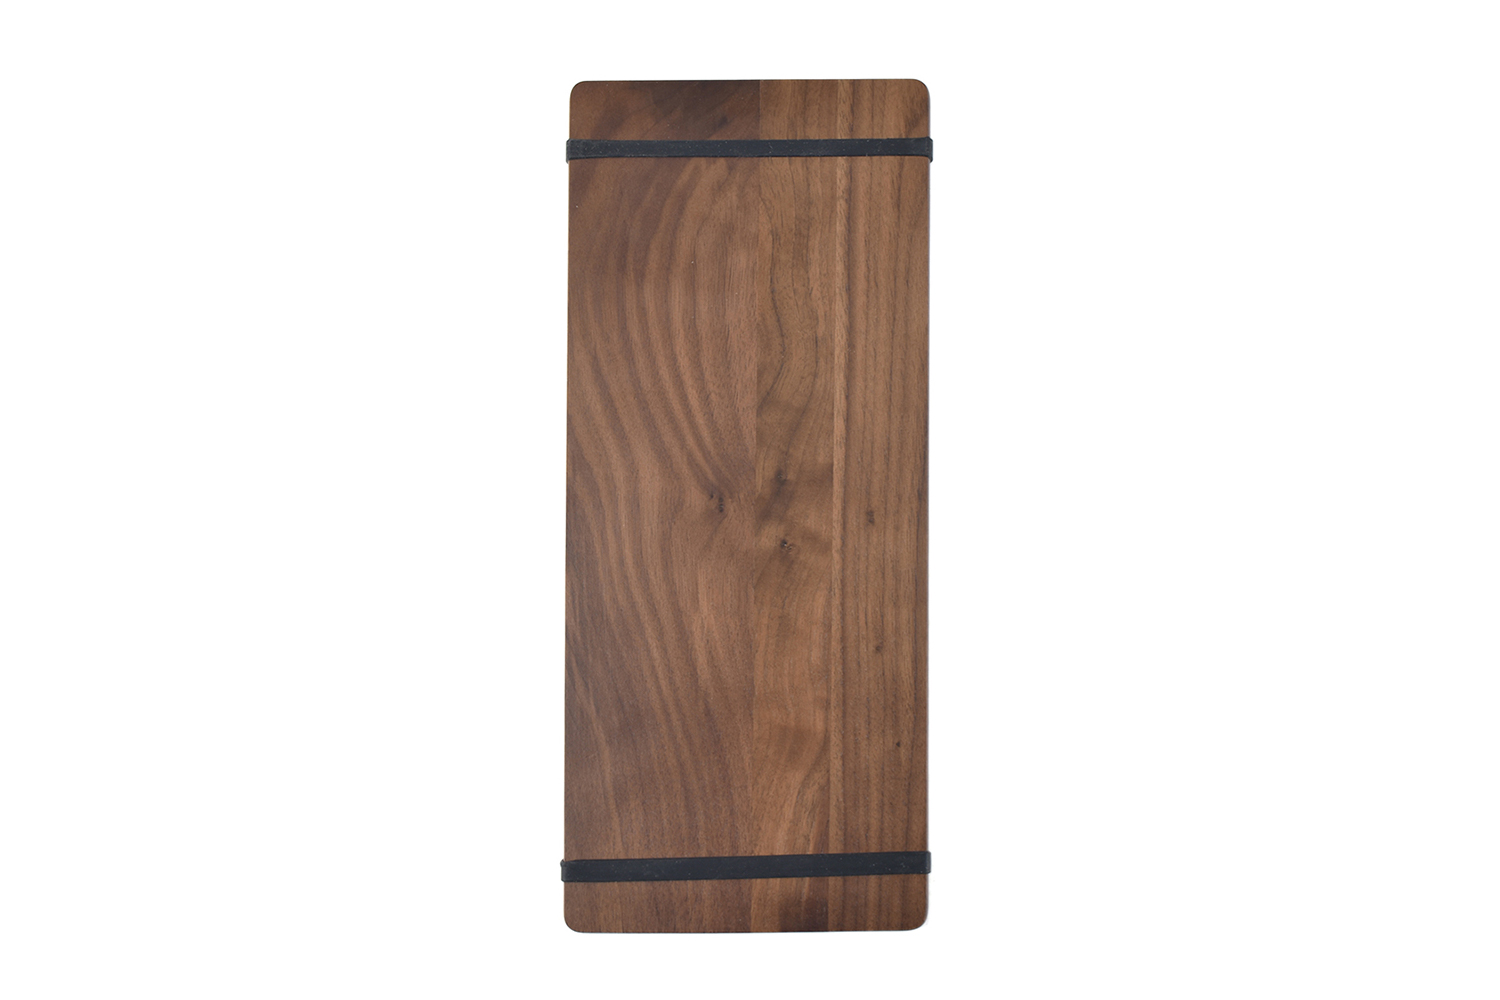 Solid Walnut Check Presenter with 1 Latex Free Rubber Band